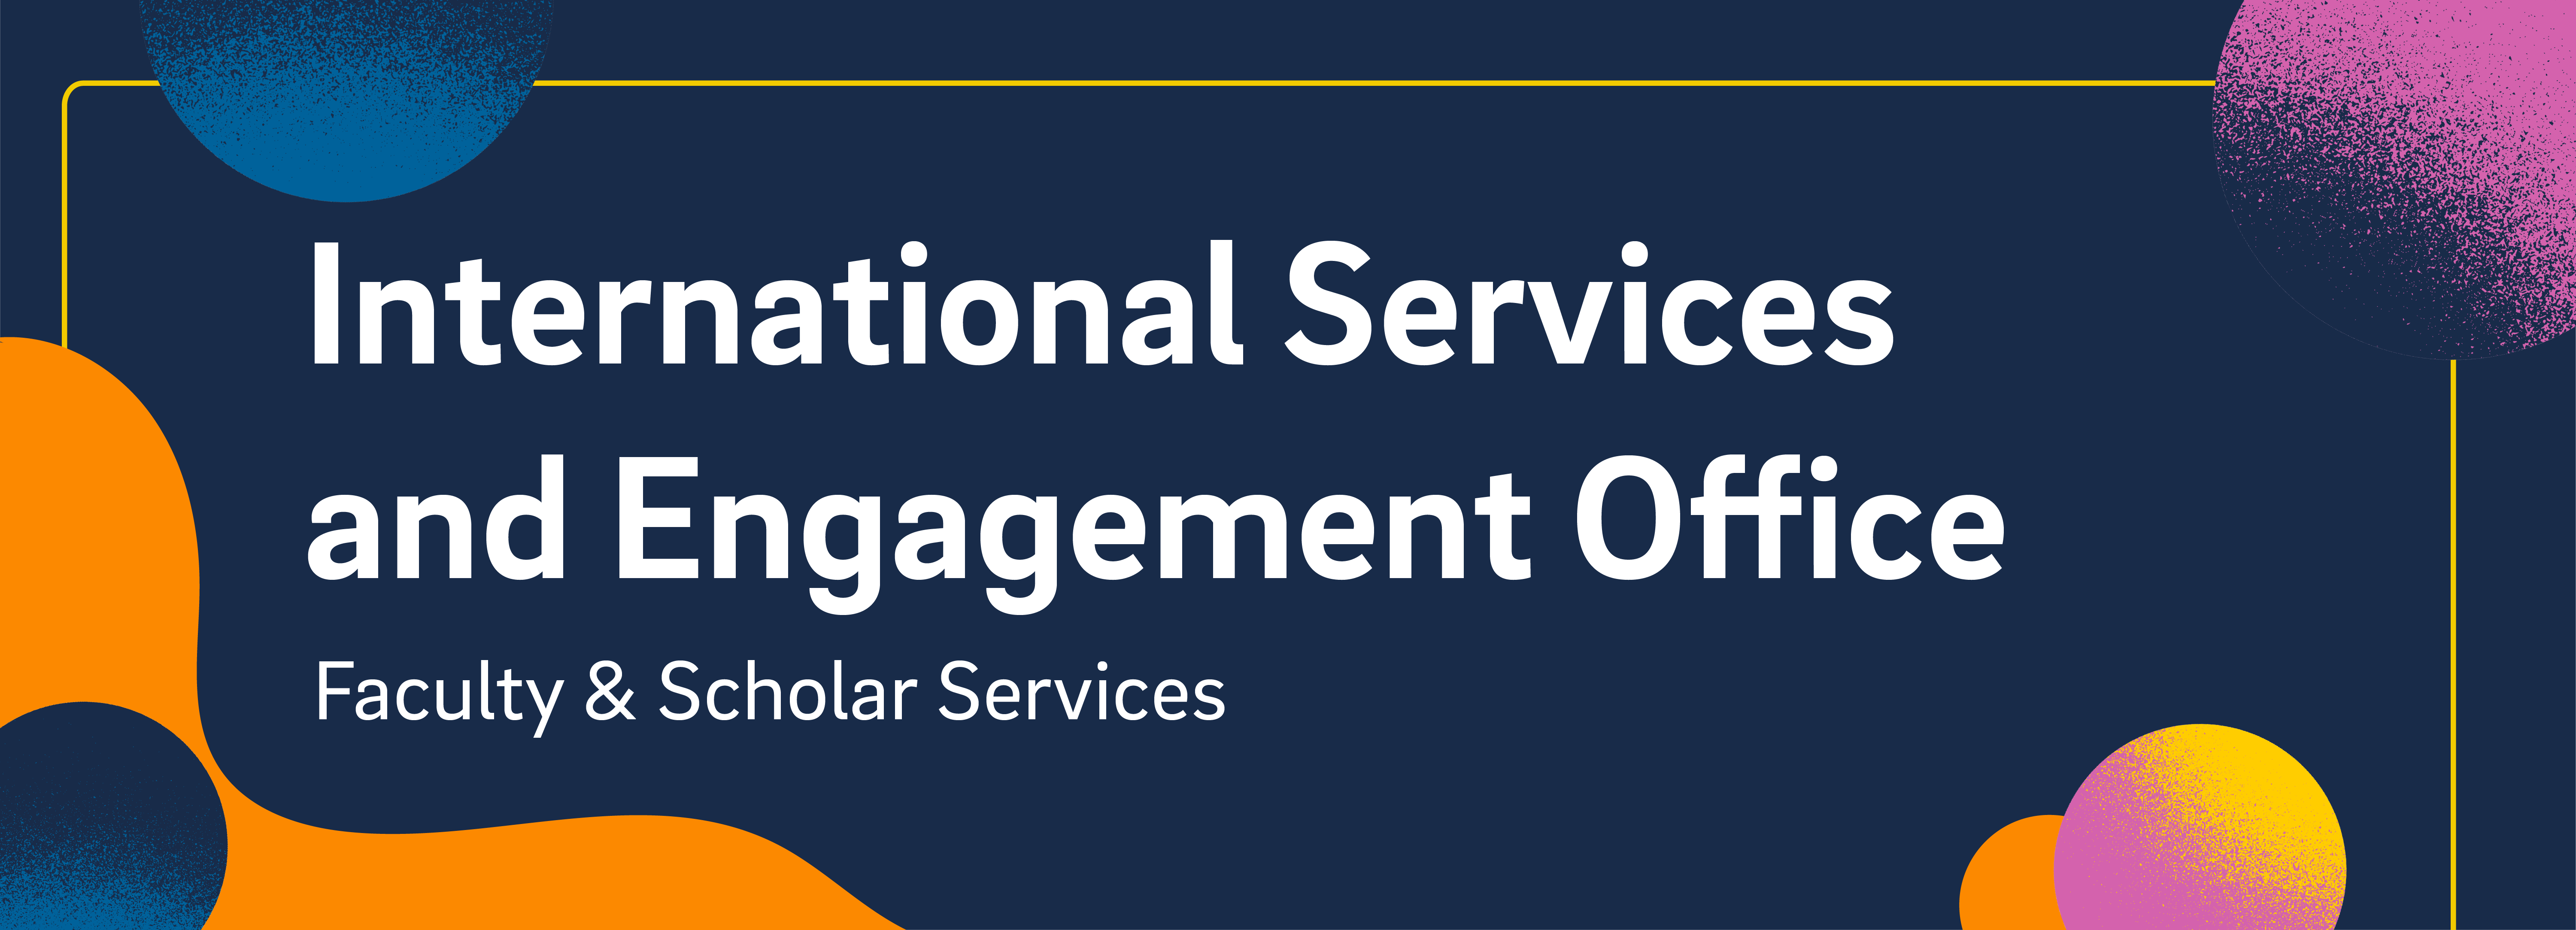 International Services and Engagement Office banner